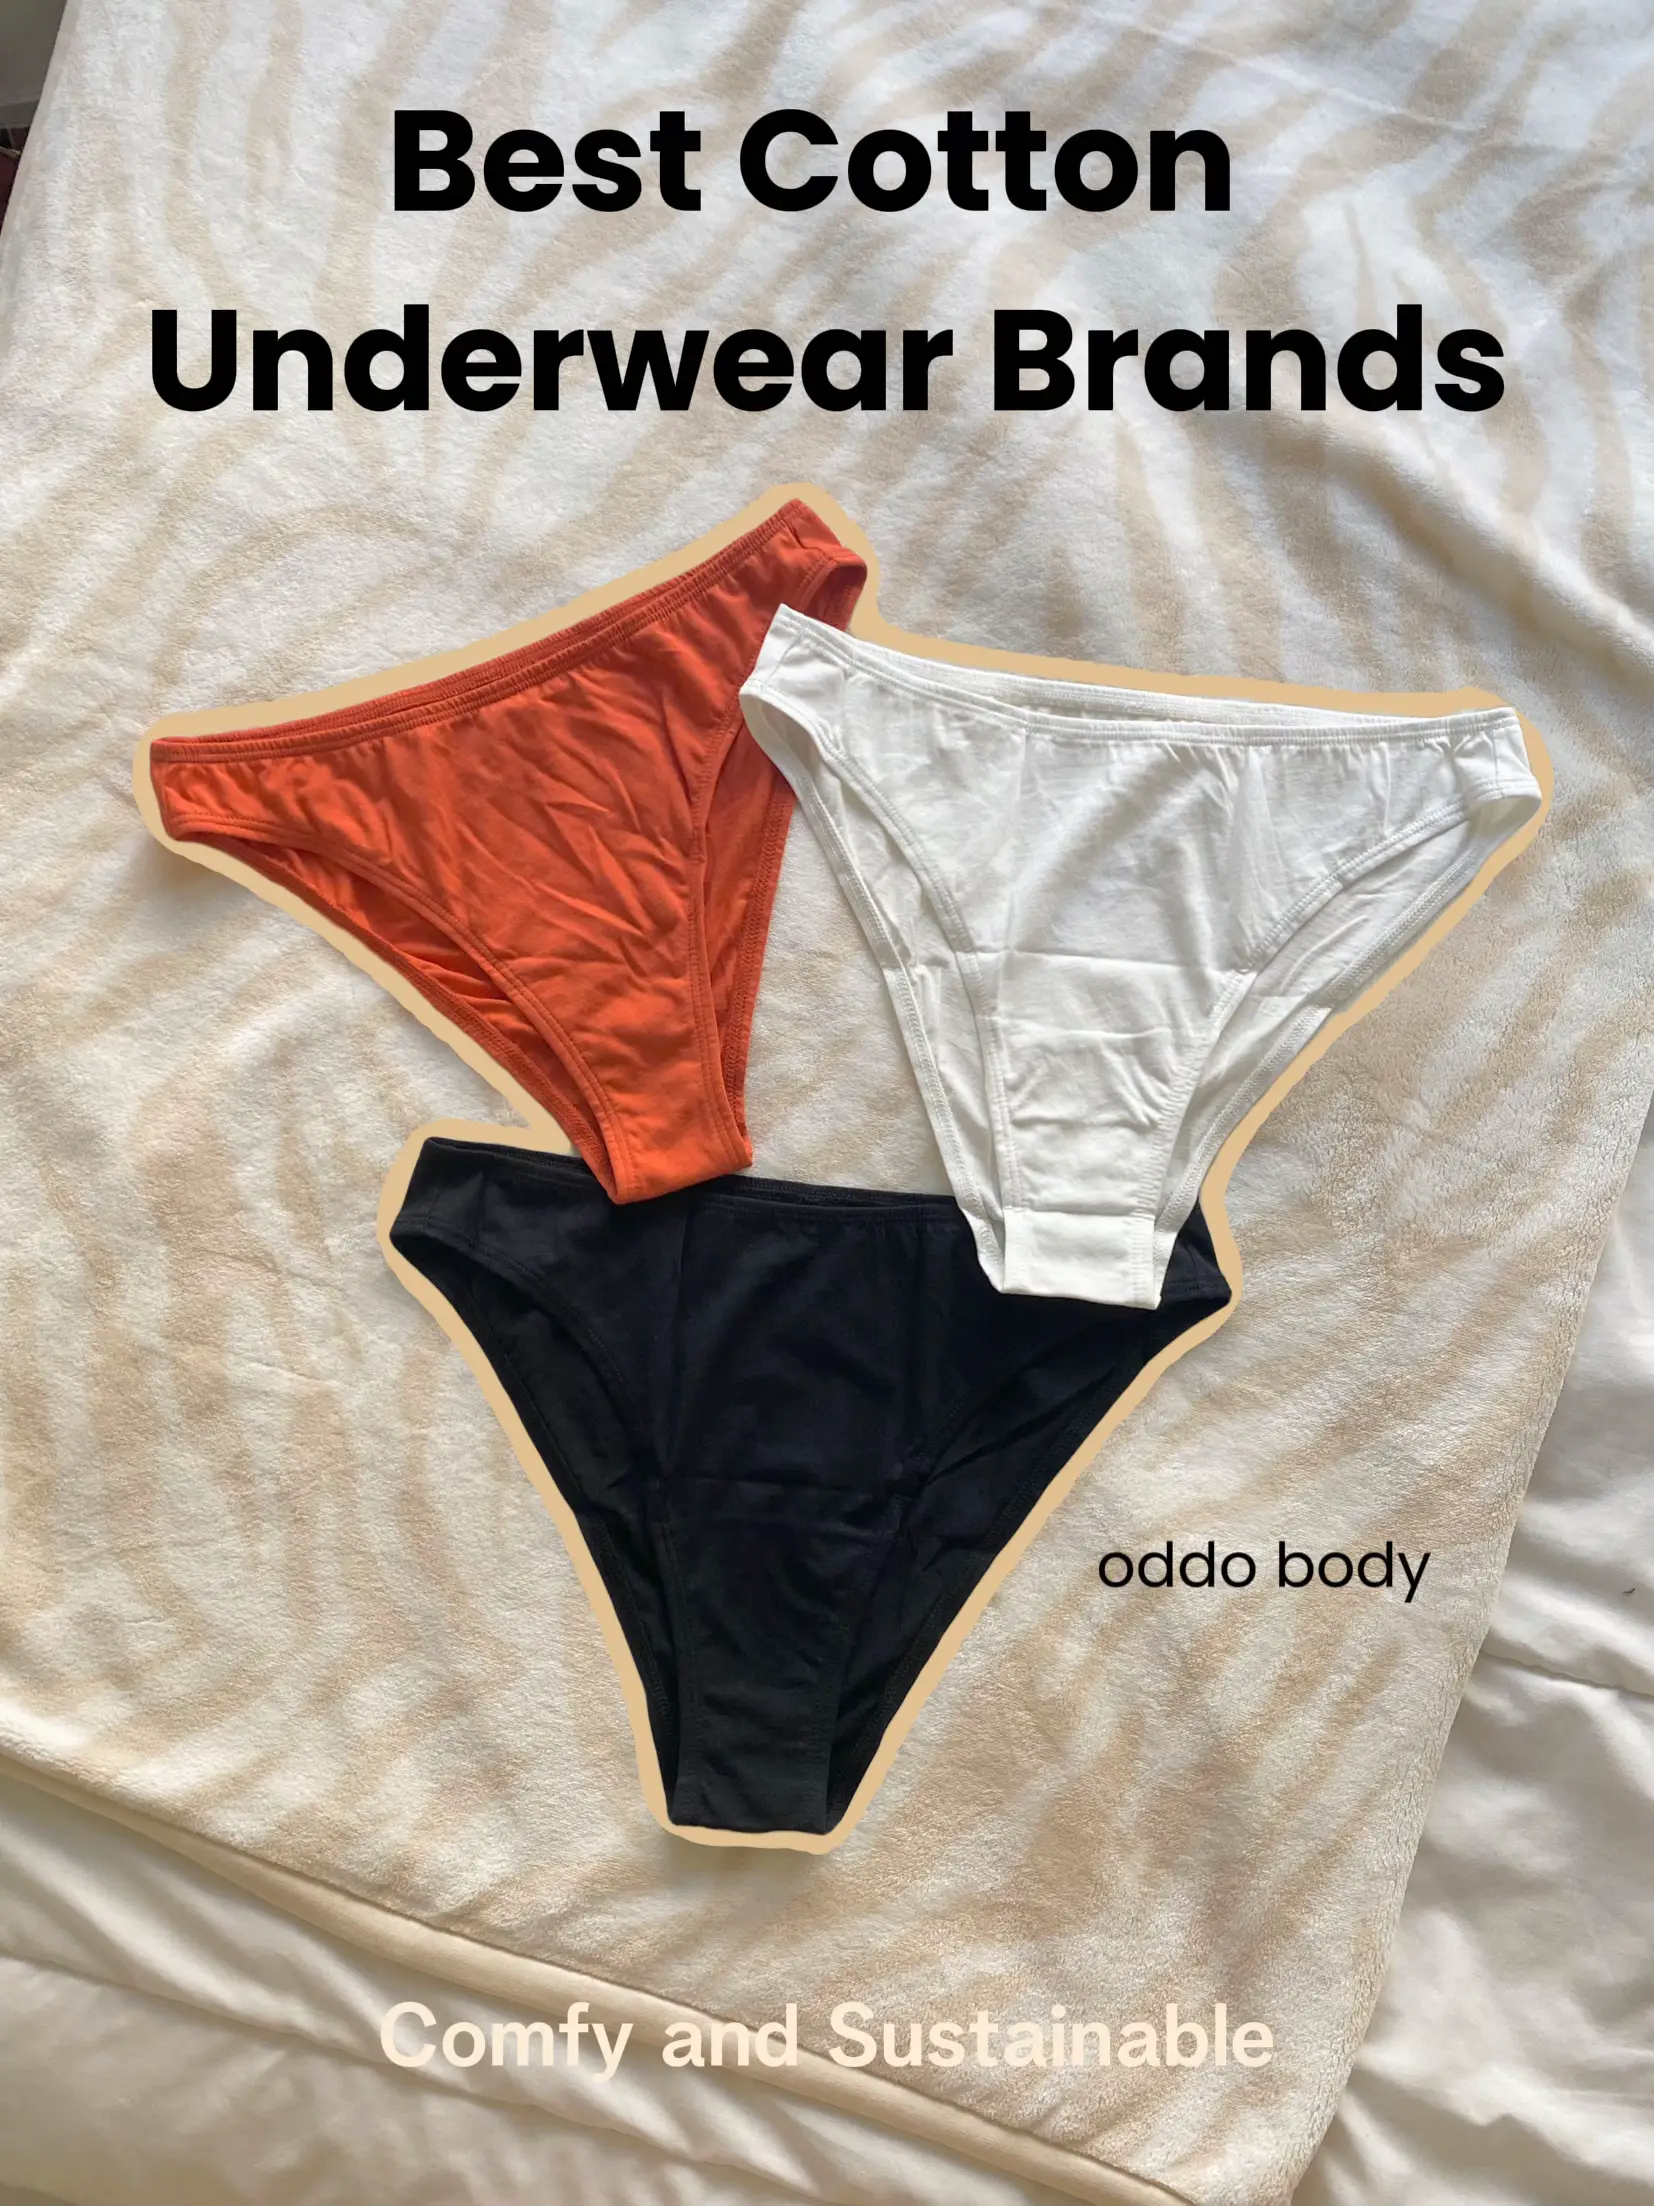 LOUNGE underwear and apparel 🫶🏼, Gallery posted by wornbymolly